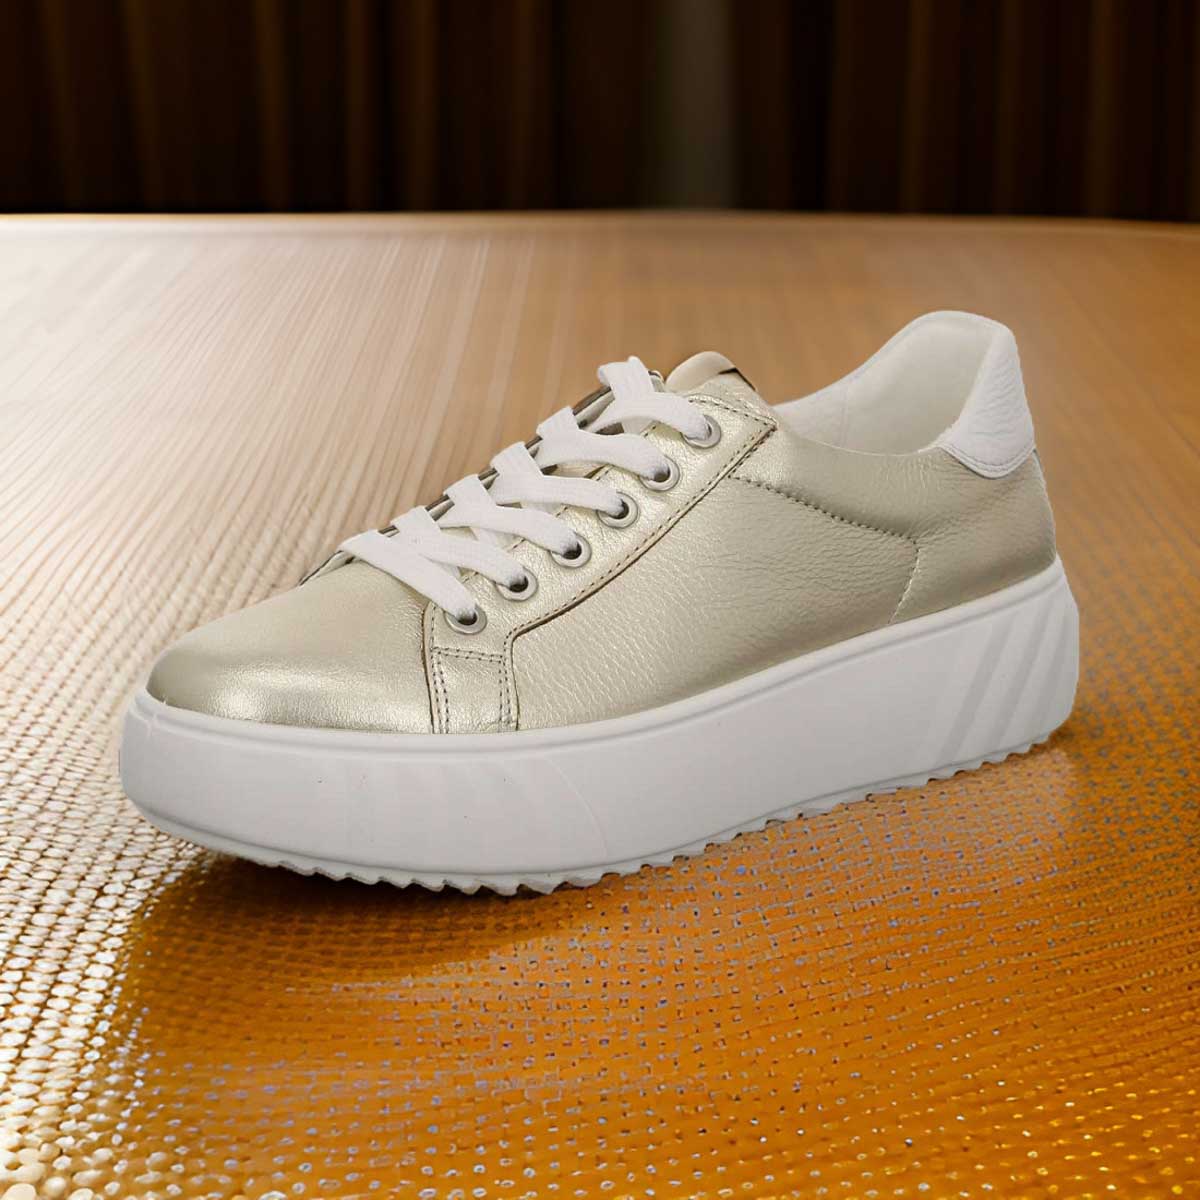 Ara Monaco Gold & White Leather Sneakers Women - Extra Wide Fit Luxury Comfort